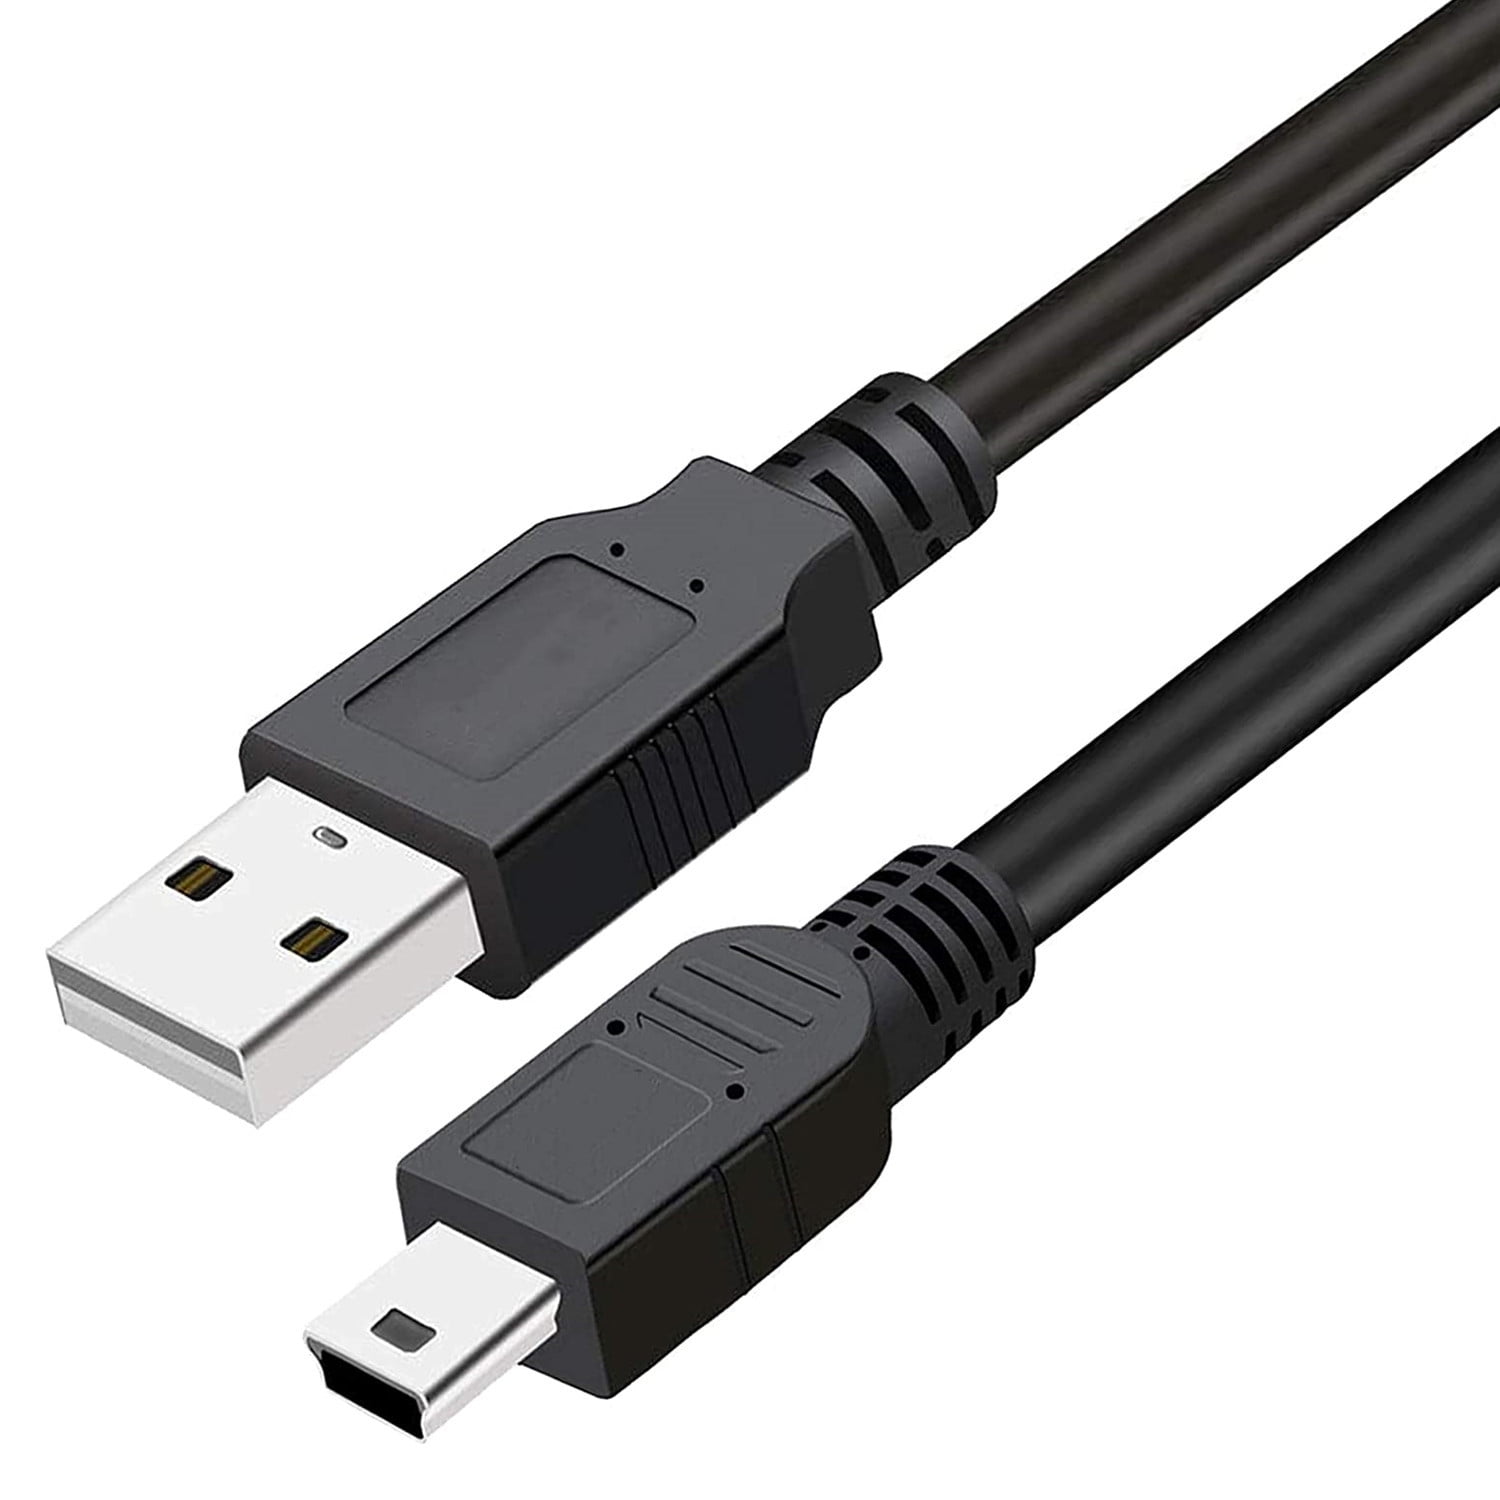 Raap stout Kostbaar PwrON USB DC Charger PC Data SYNC Cable Cord Lead Replacement for Activeon  DX LX CX Action Camera - Walmart.com